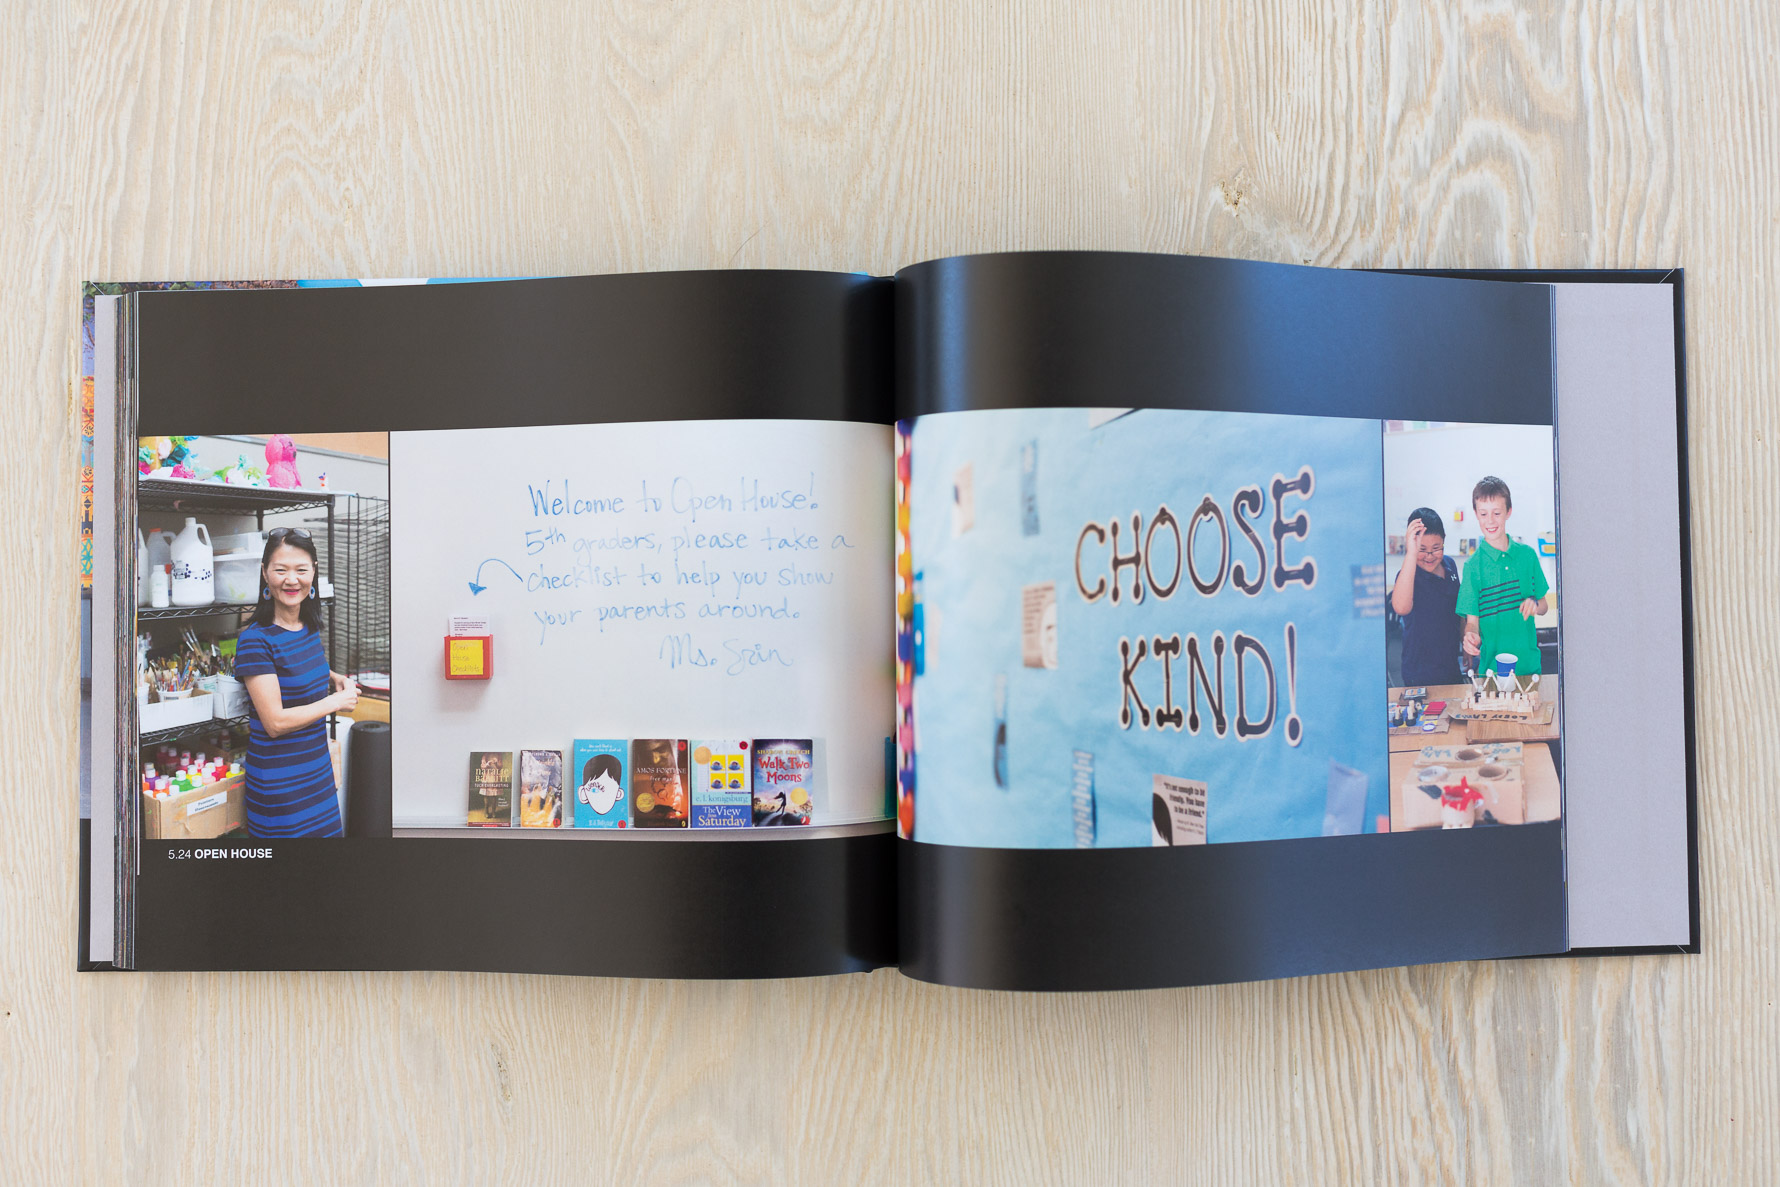 Ideas for creating fantastic school yearbooks. Photo books make for great teacher gifts and parent keepsakes alike! | www.suzanneobrienstudio.com